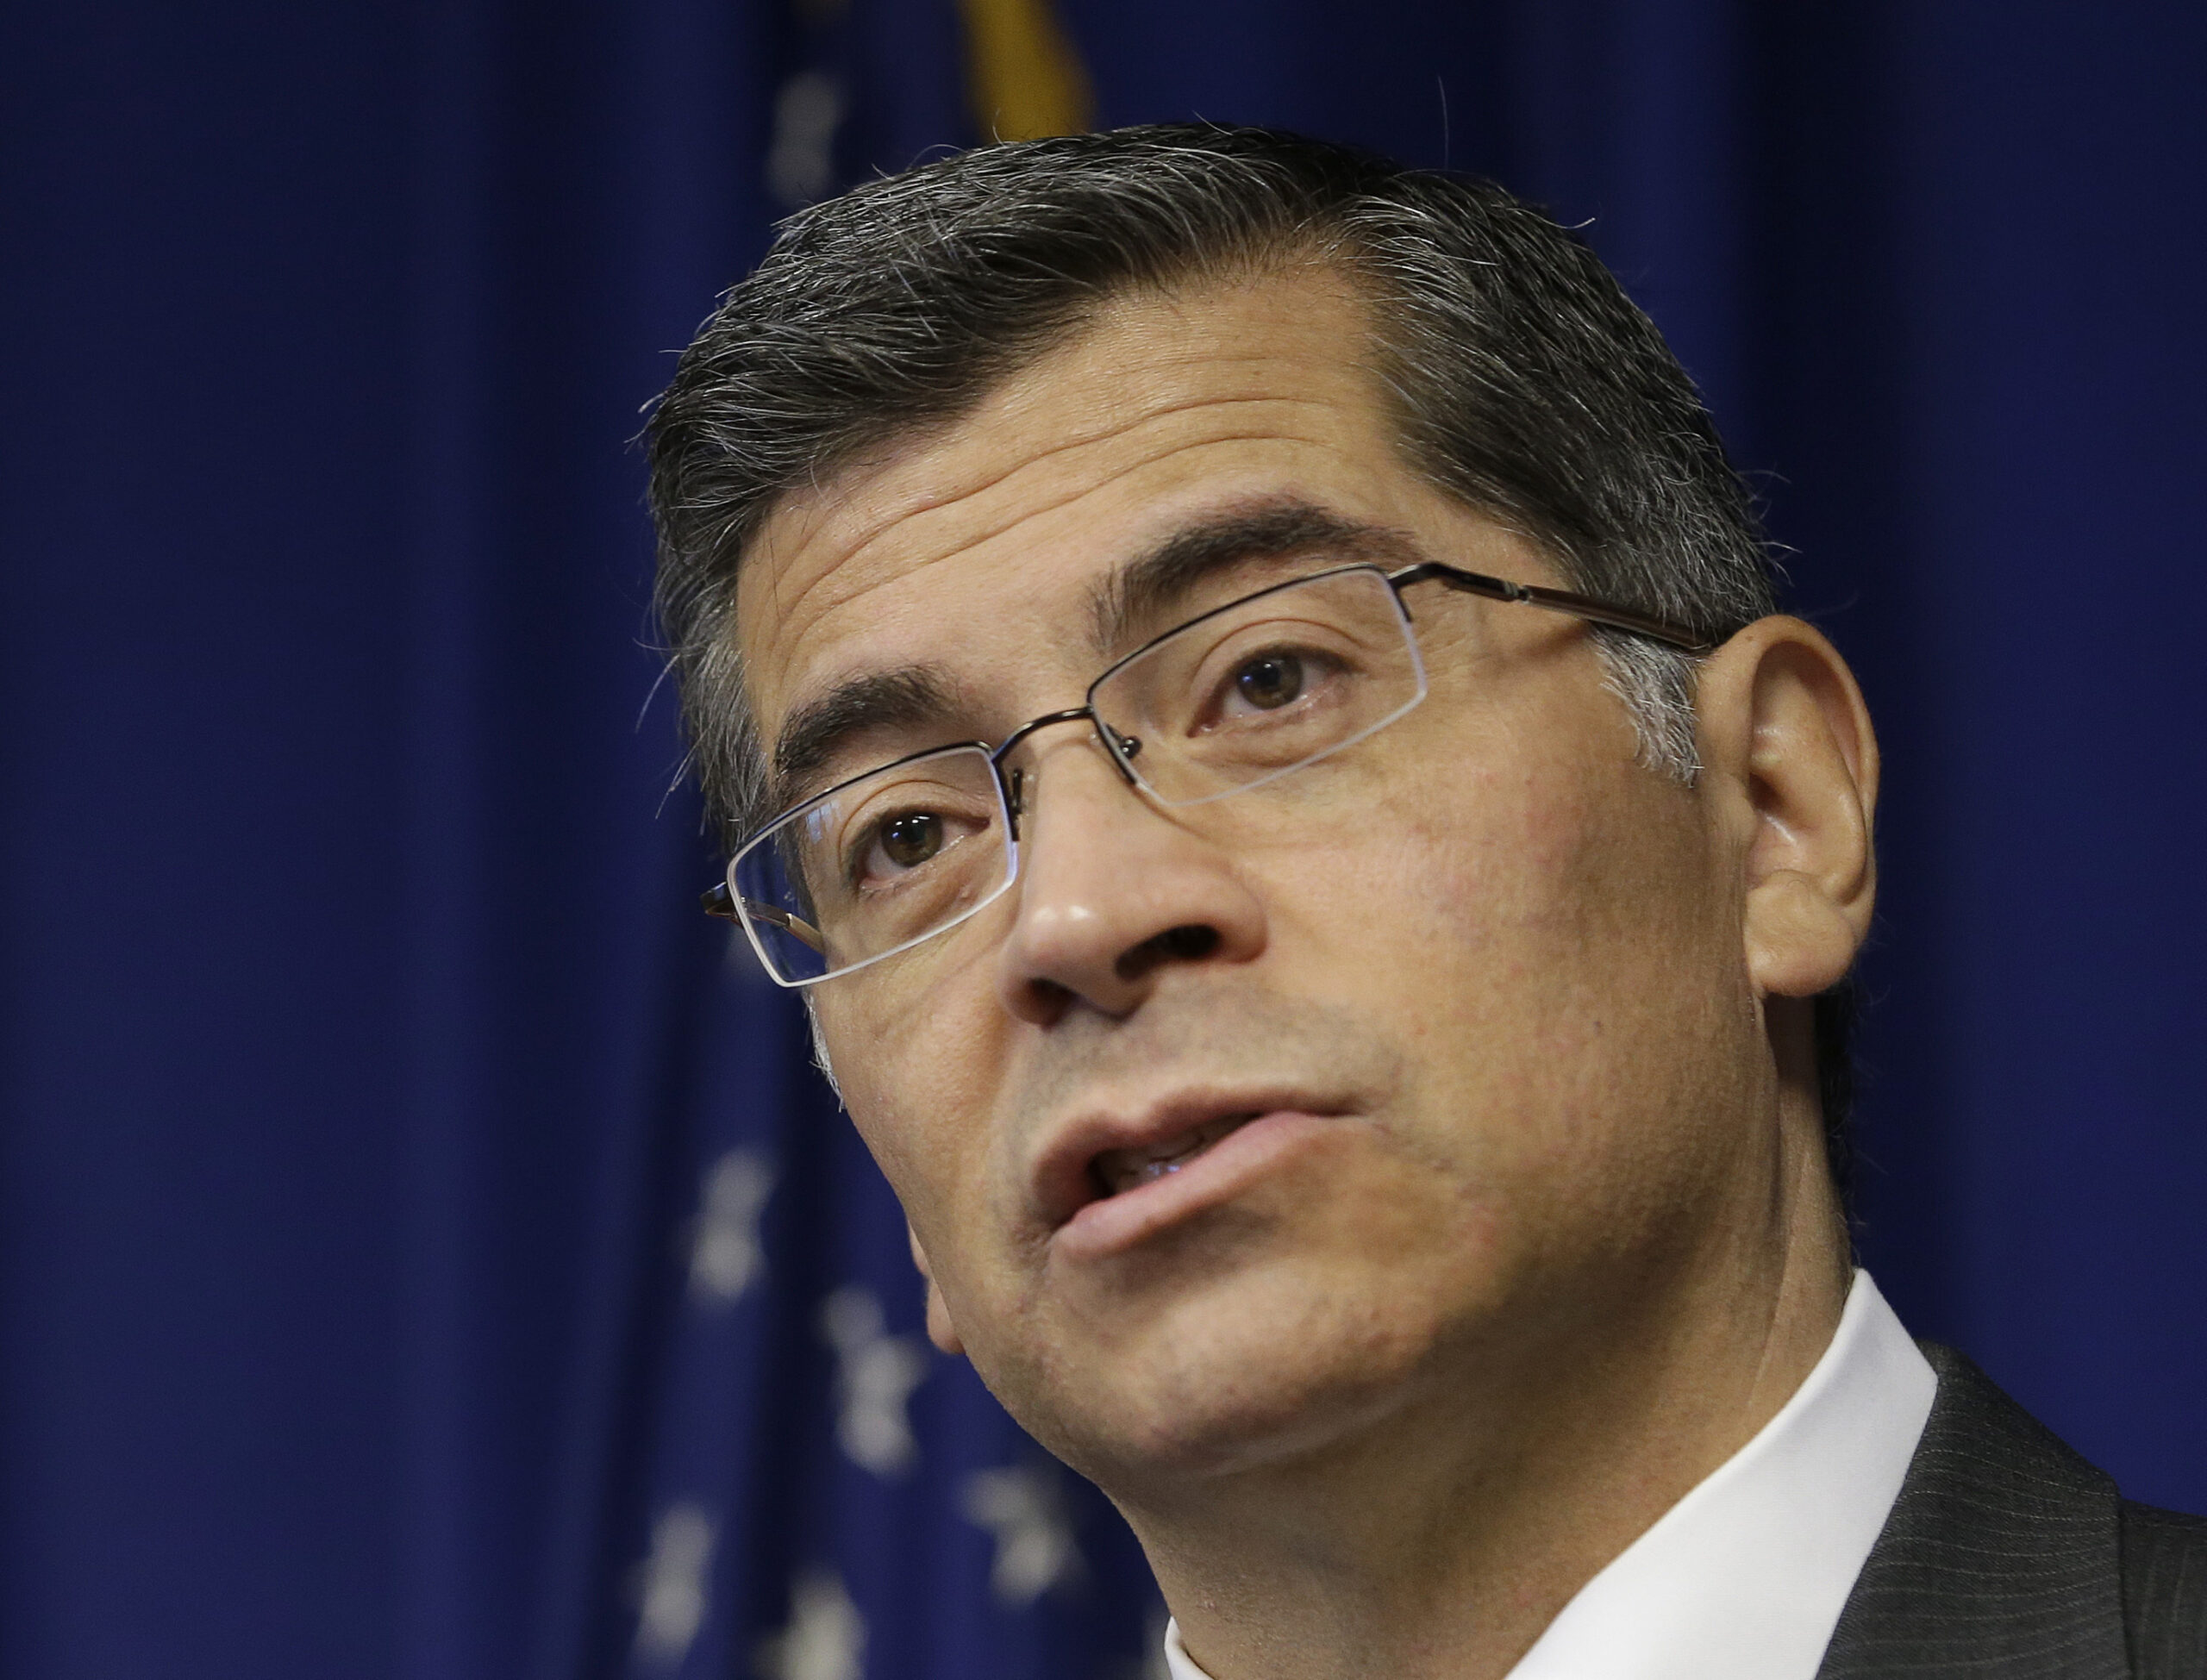 California Attorney General Xavier Becerra speaks at a news conference